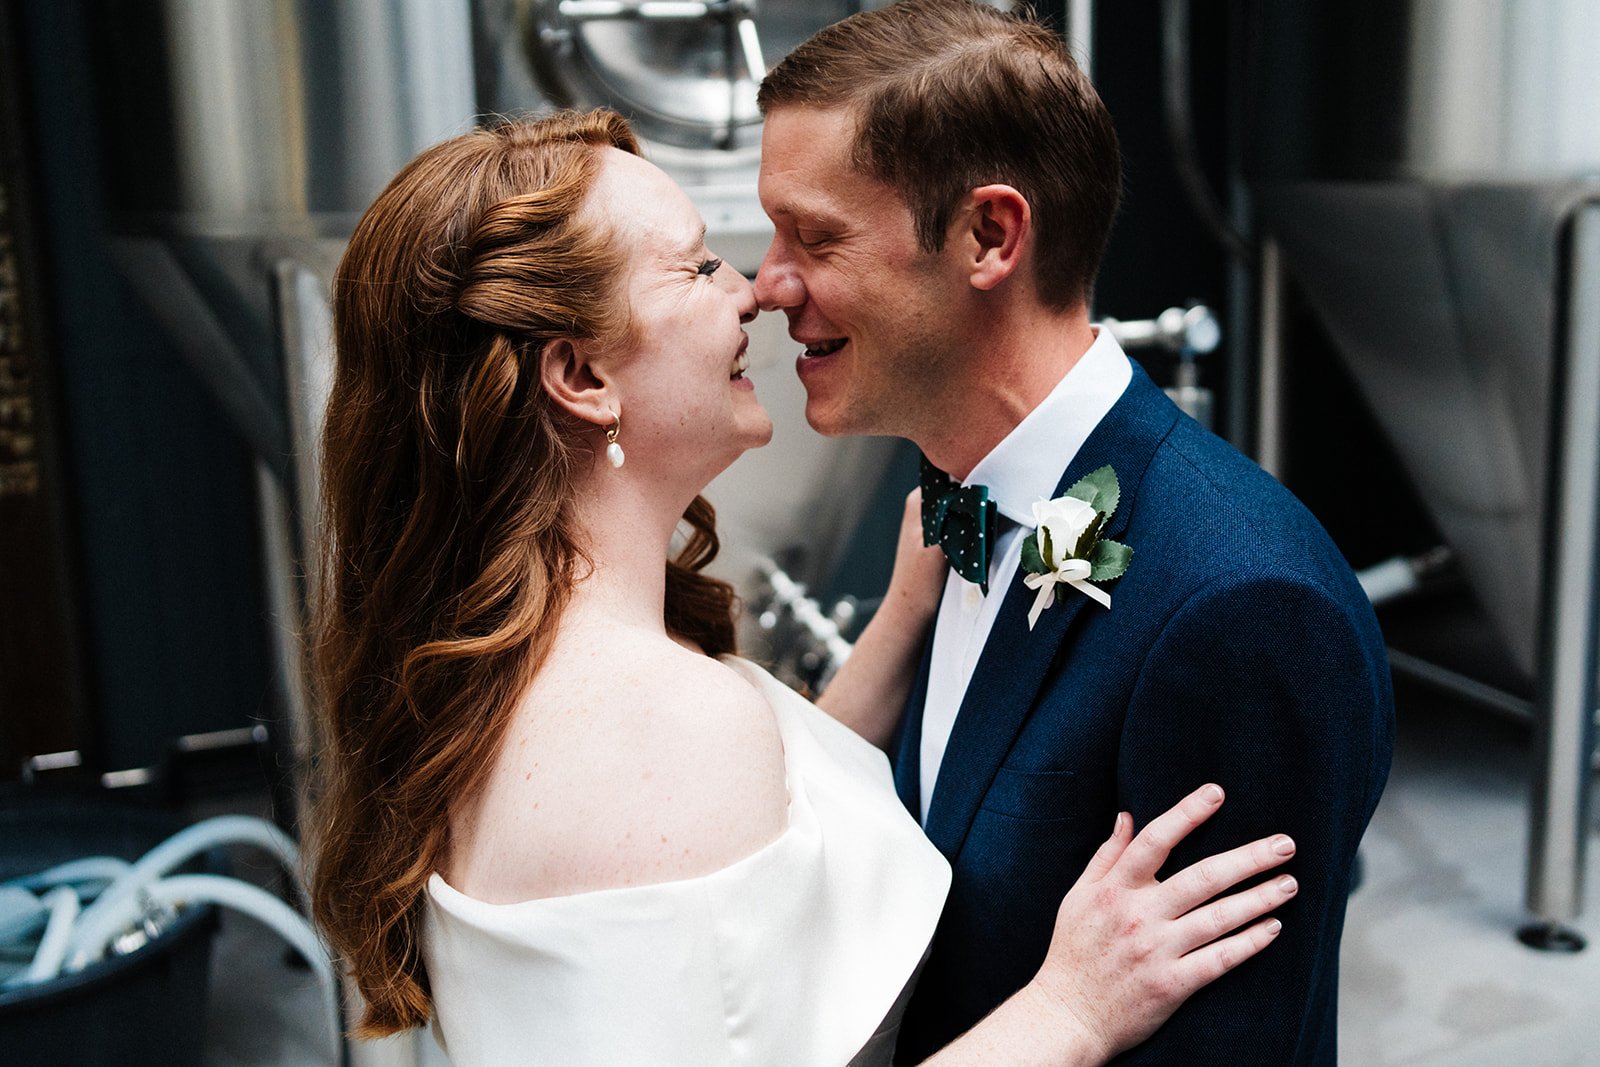 A bride and groom our nose to nose in a brewery they are smiling at each other. Wylam Brewery wedding